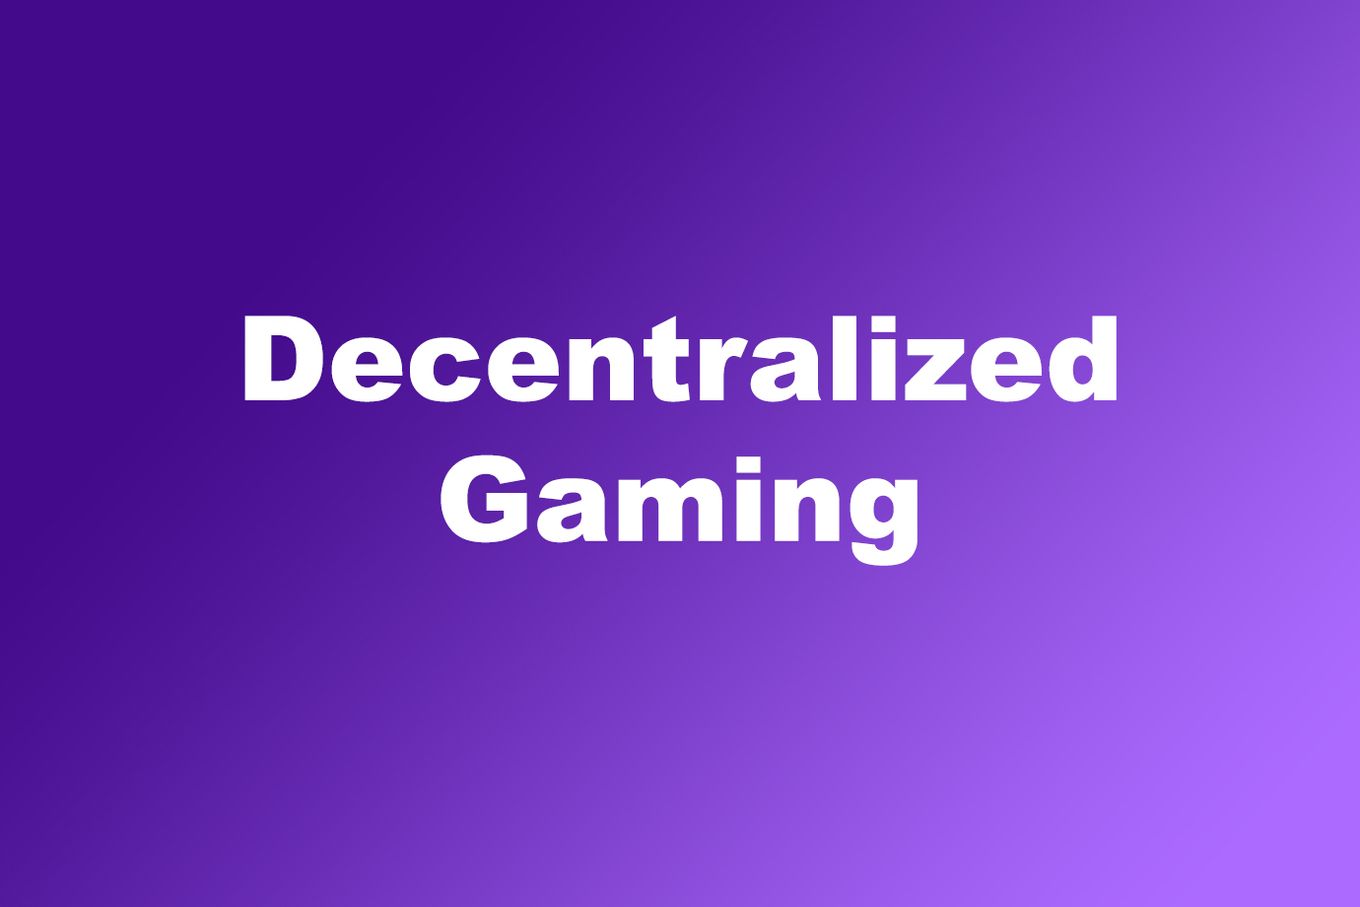 Decentralized gaming